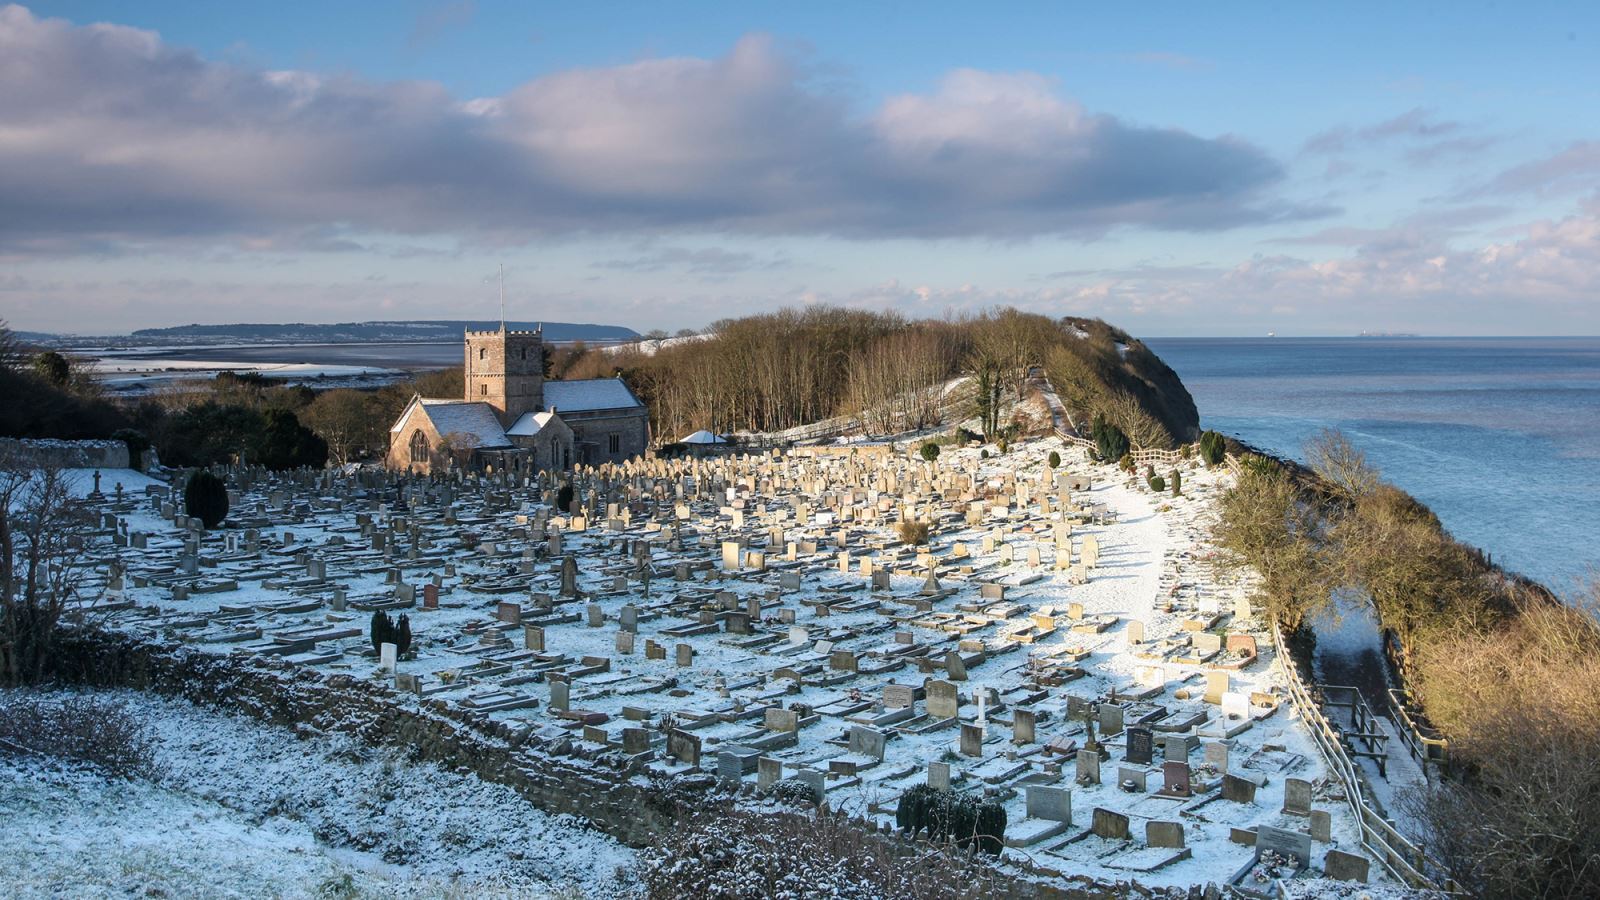 Snowy scene of a church and churchyard overlooking the sea under blue skies